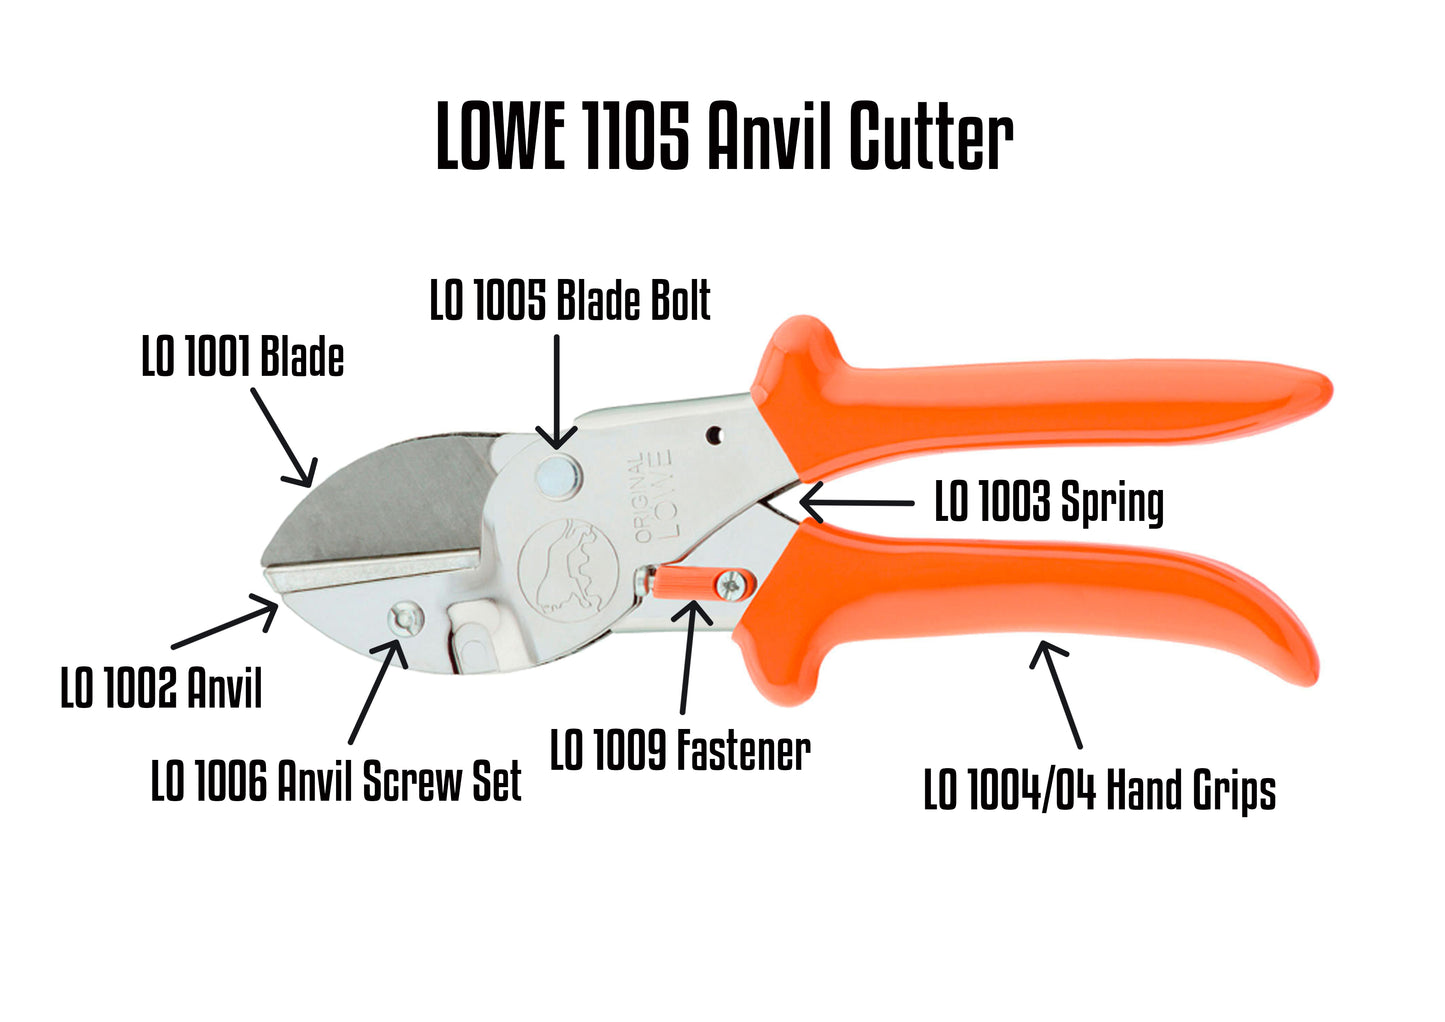 Lowe 1105 Parts Guide